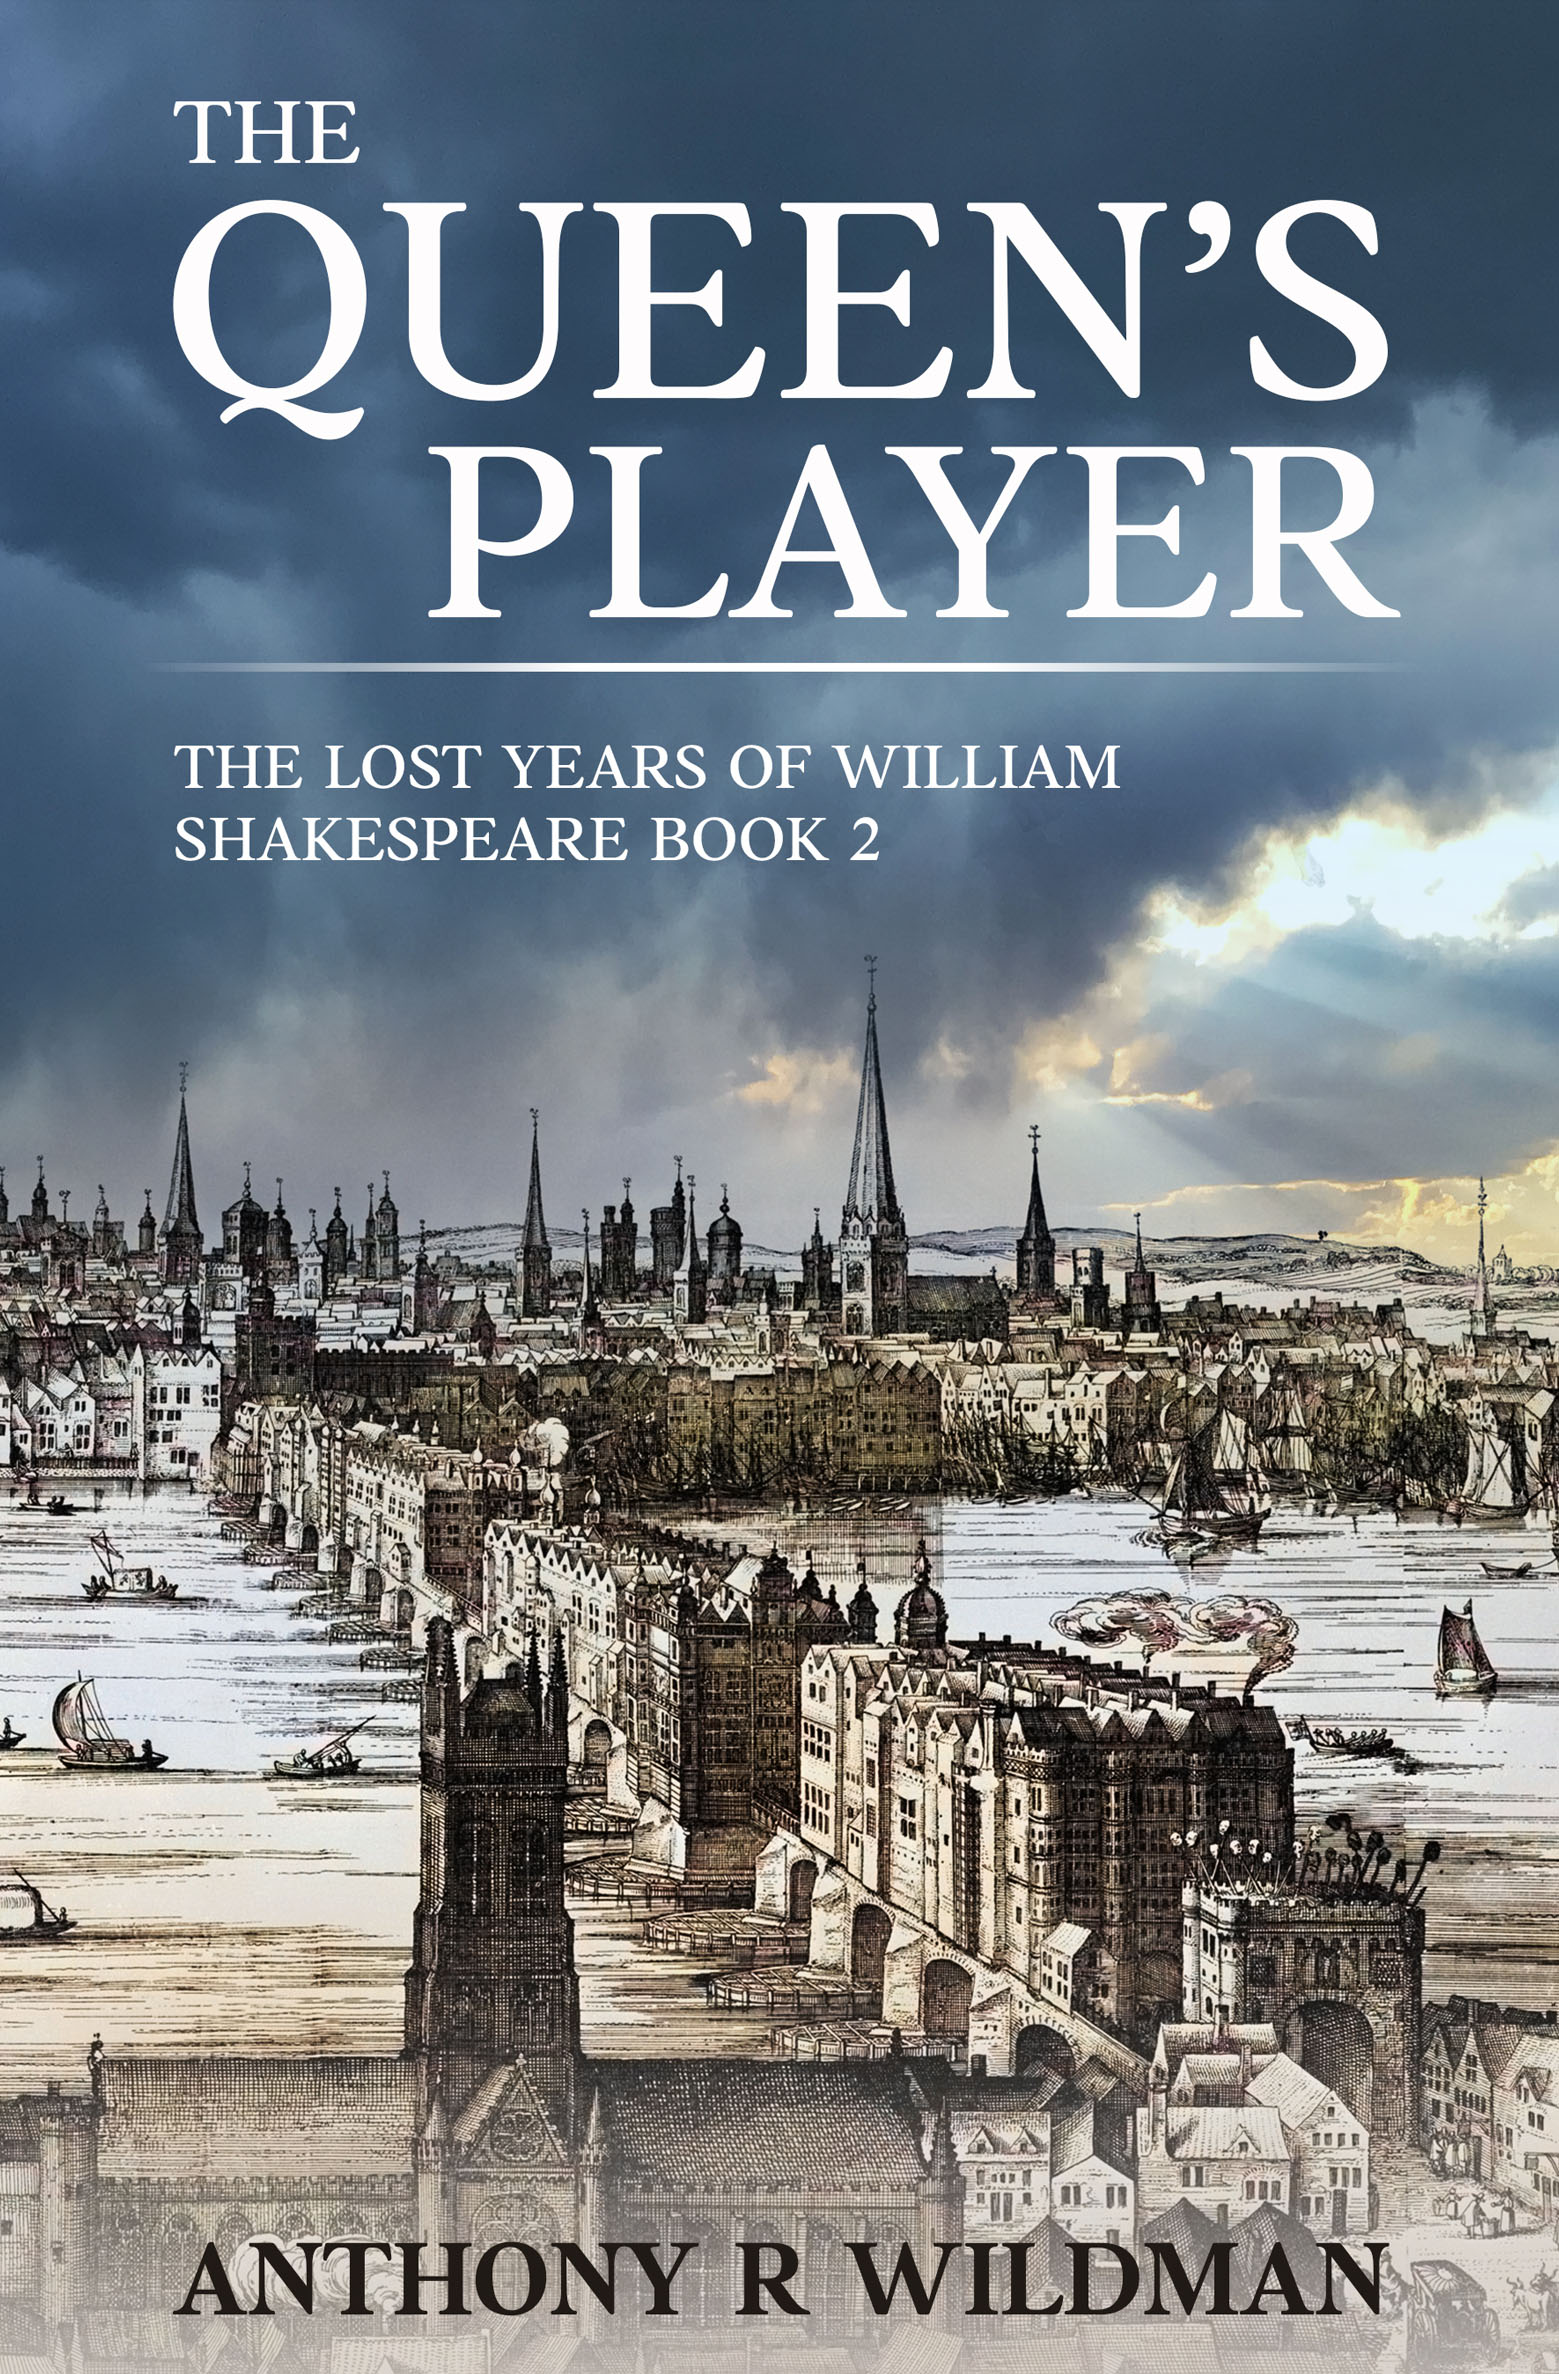 The Queen's Player by Anthony R. Wildman